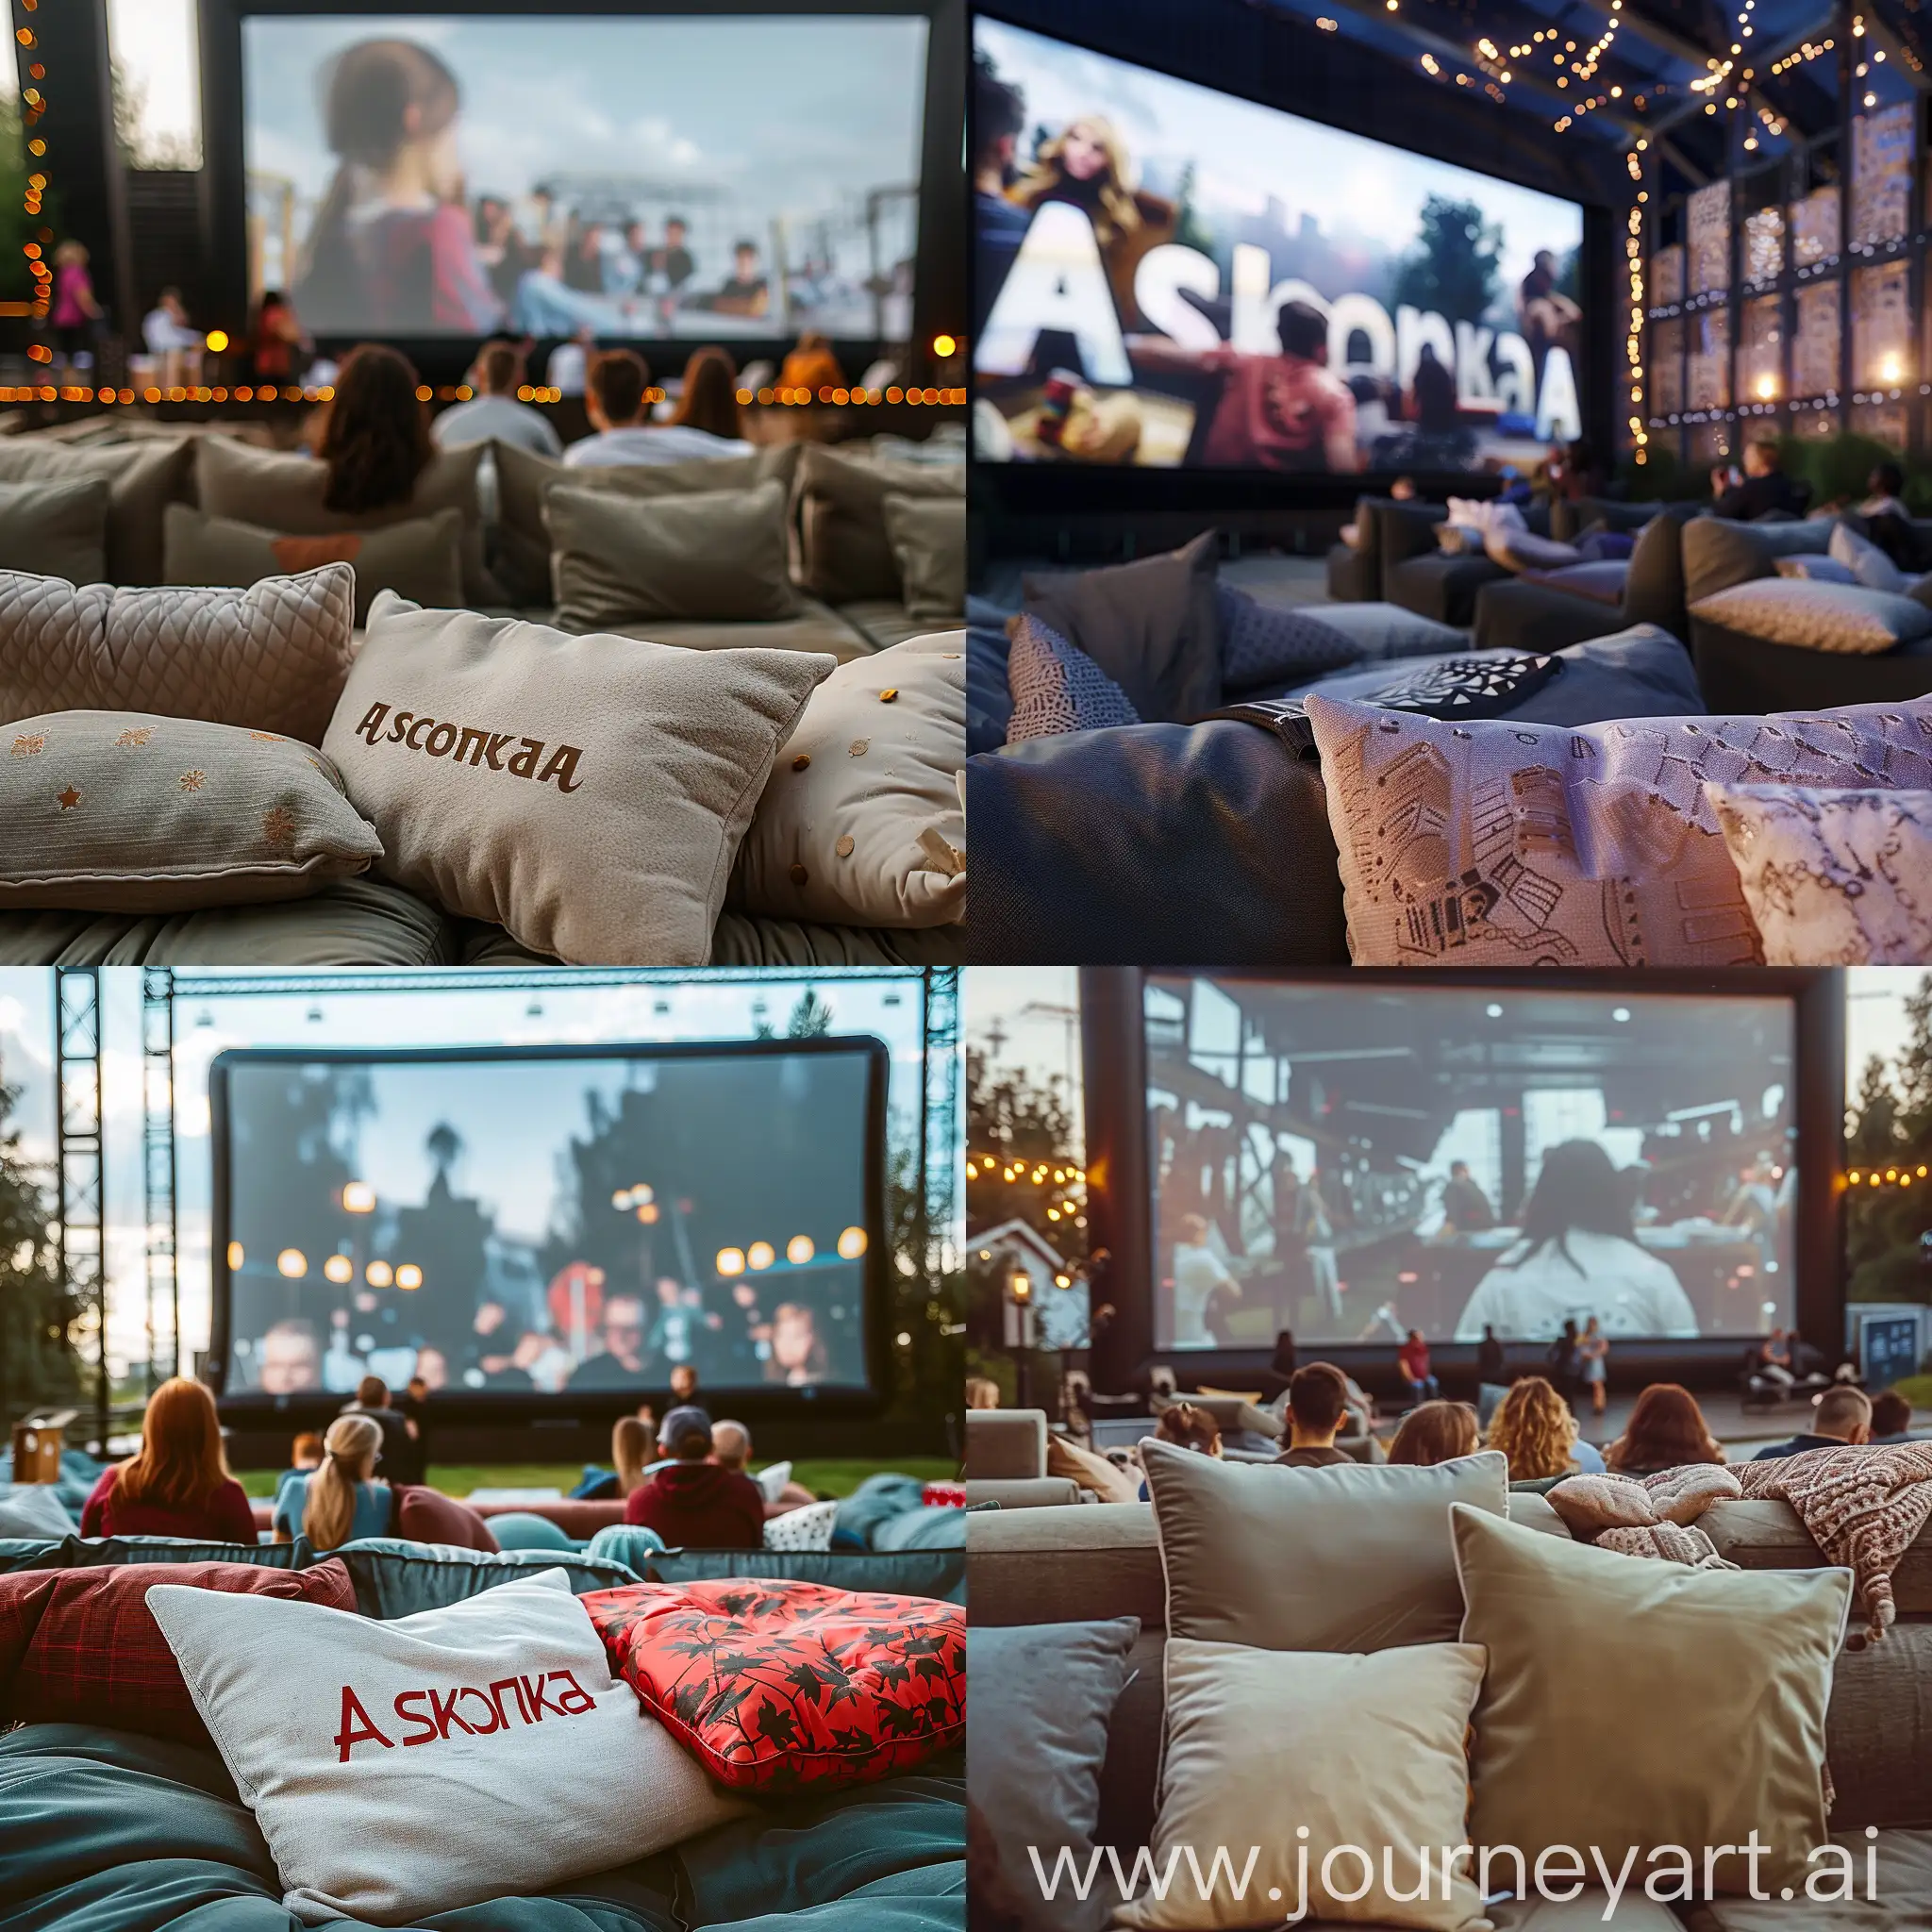 Outdoor-Cinema-Night-Festive-Atmosphere-at-Magnitogorsk-Attraction-Park